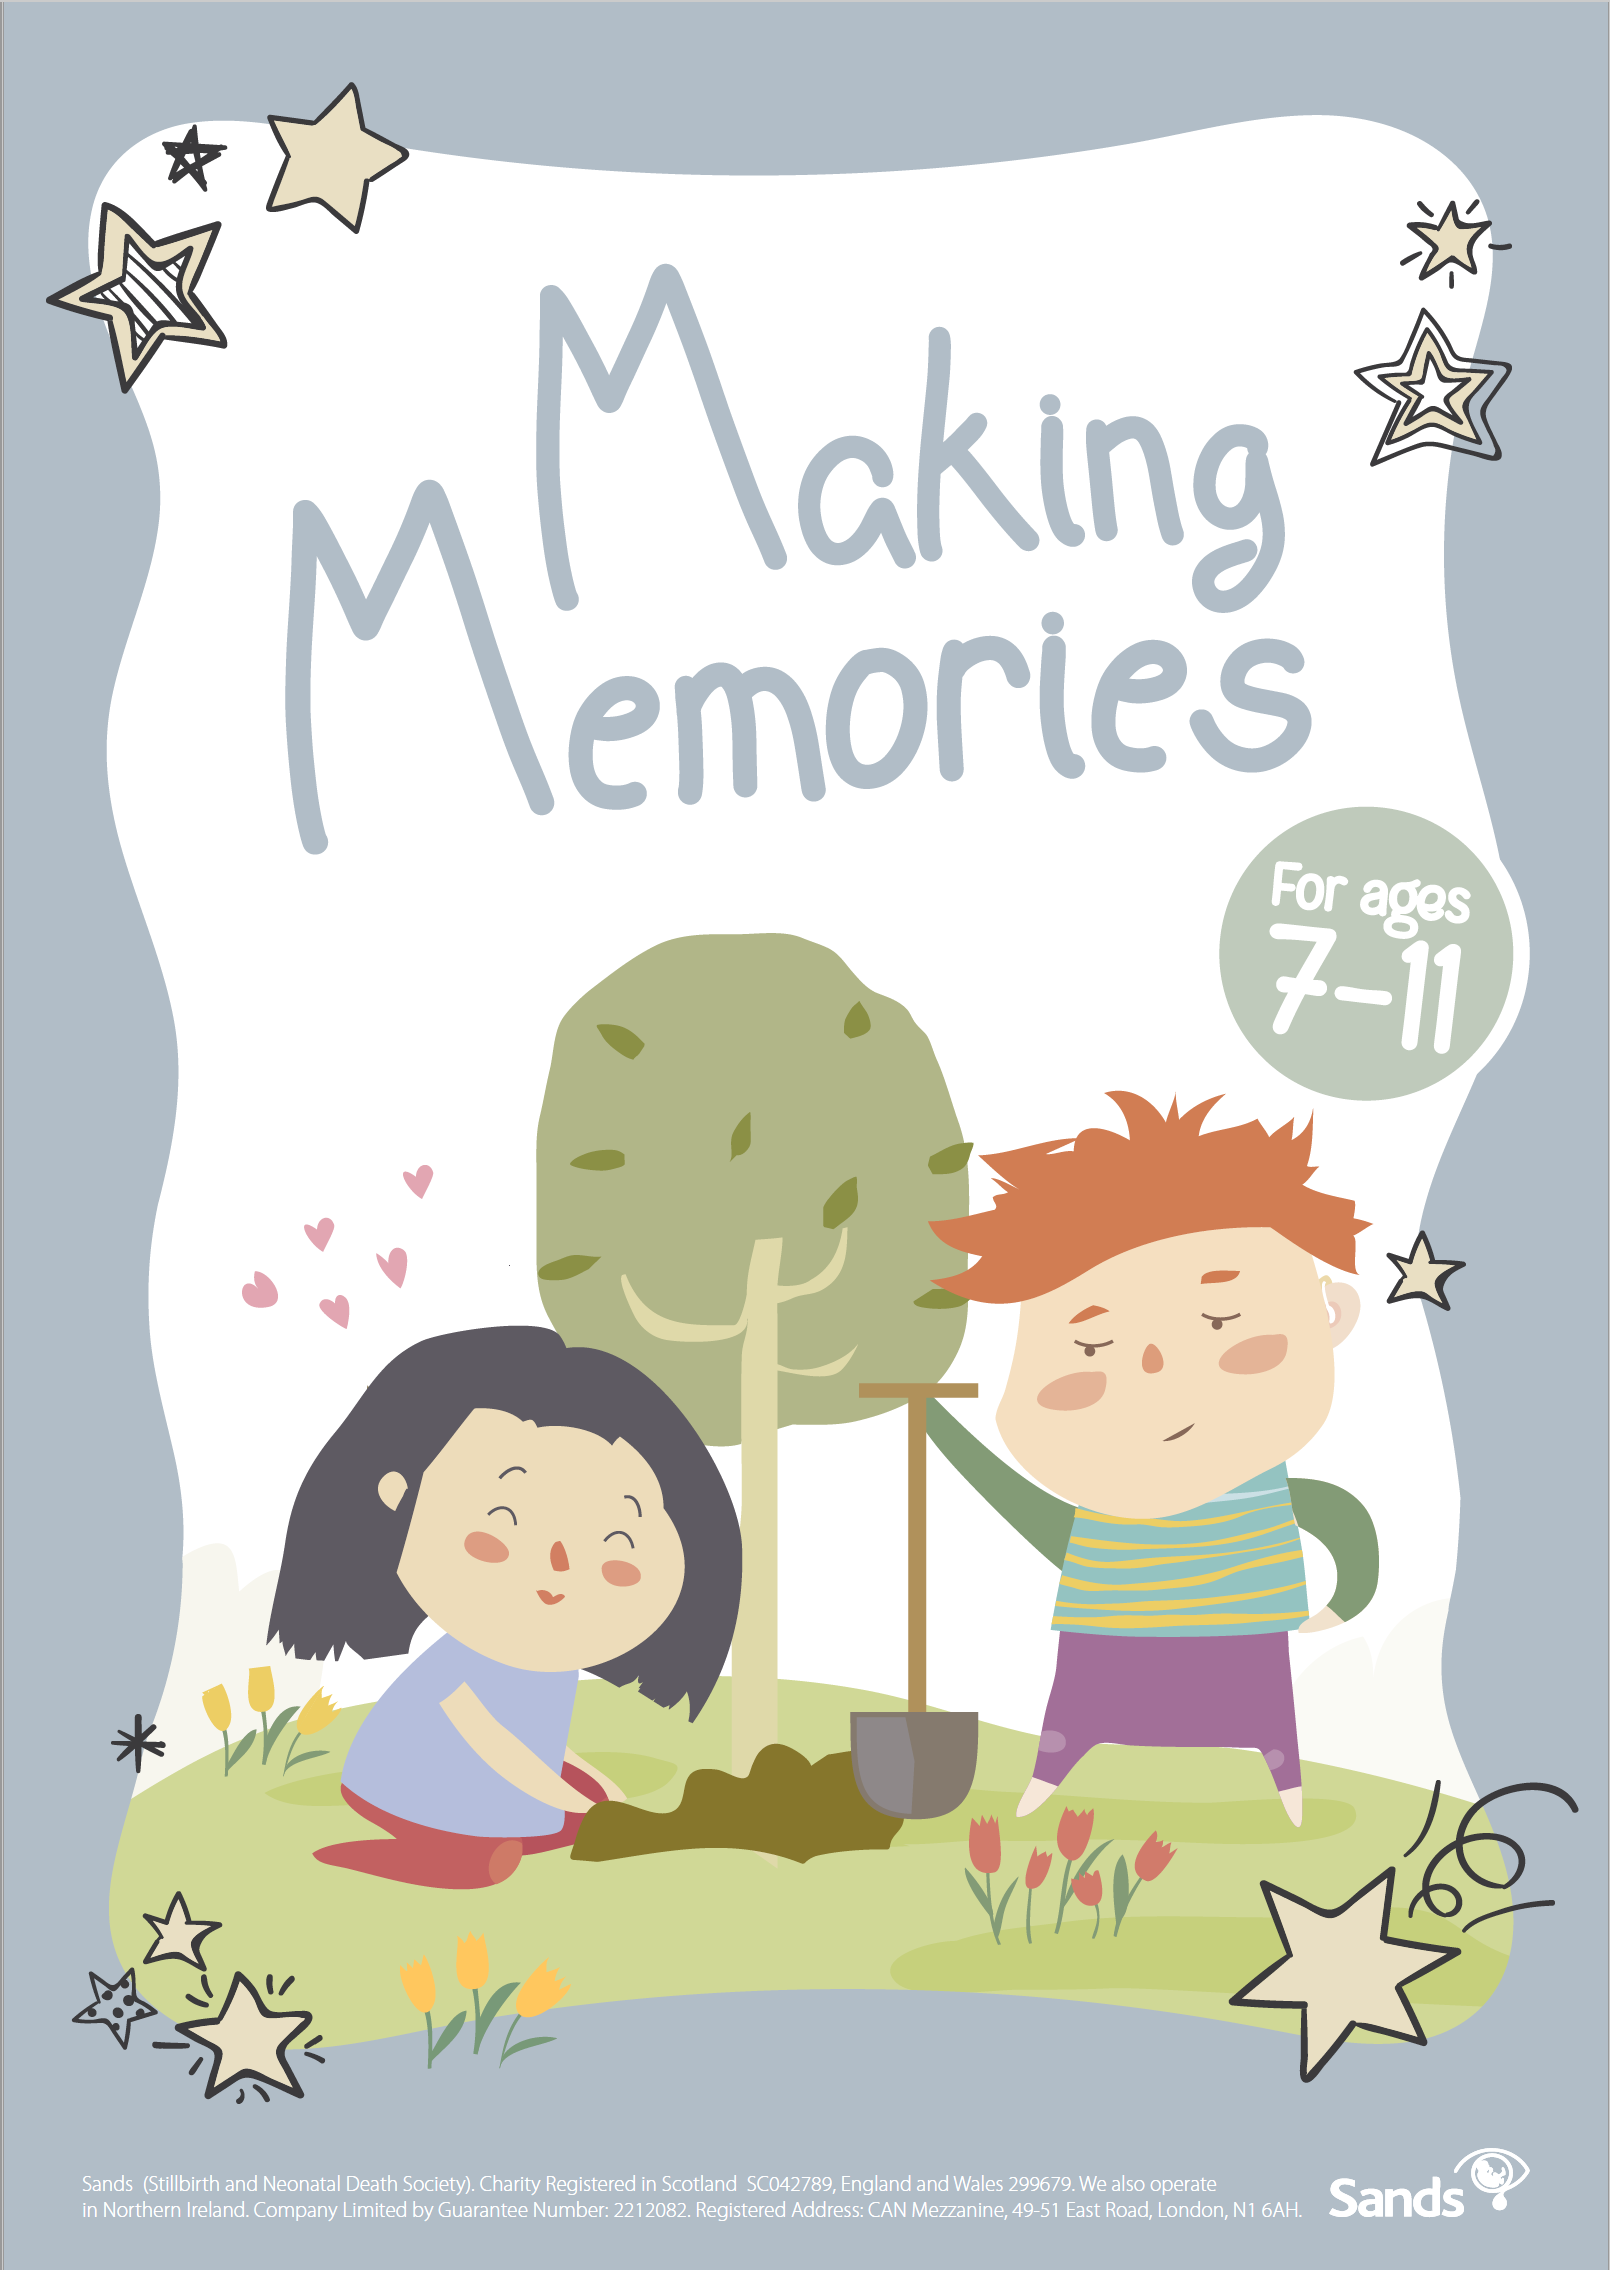 Memory Making Ages 7 - 11